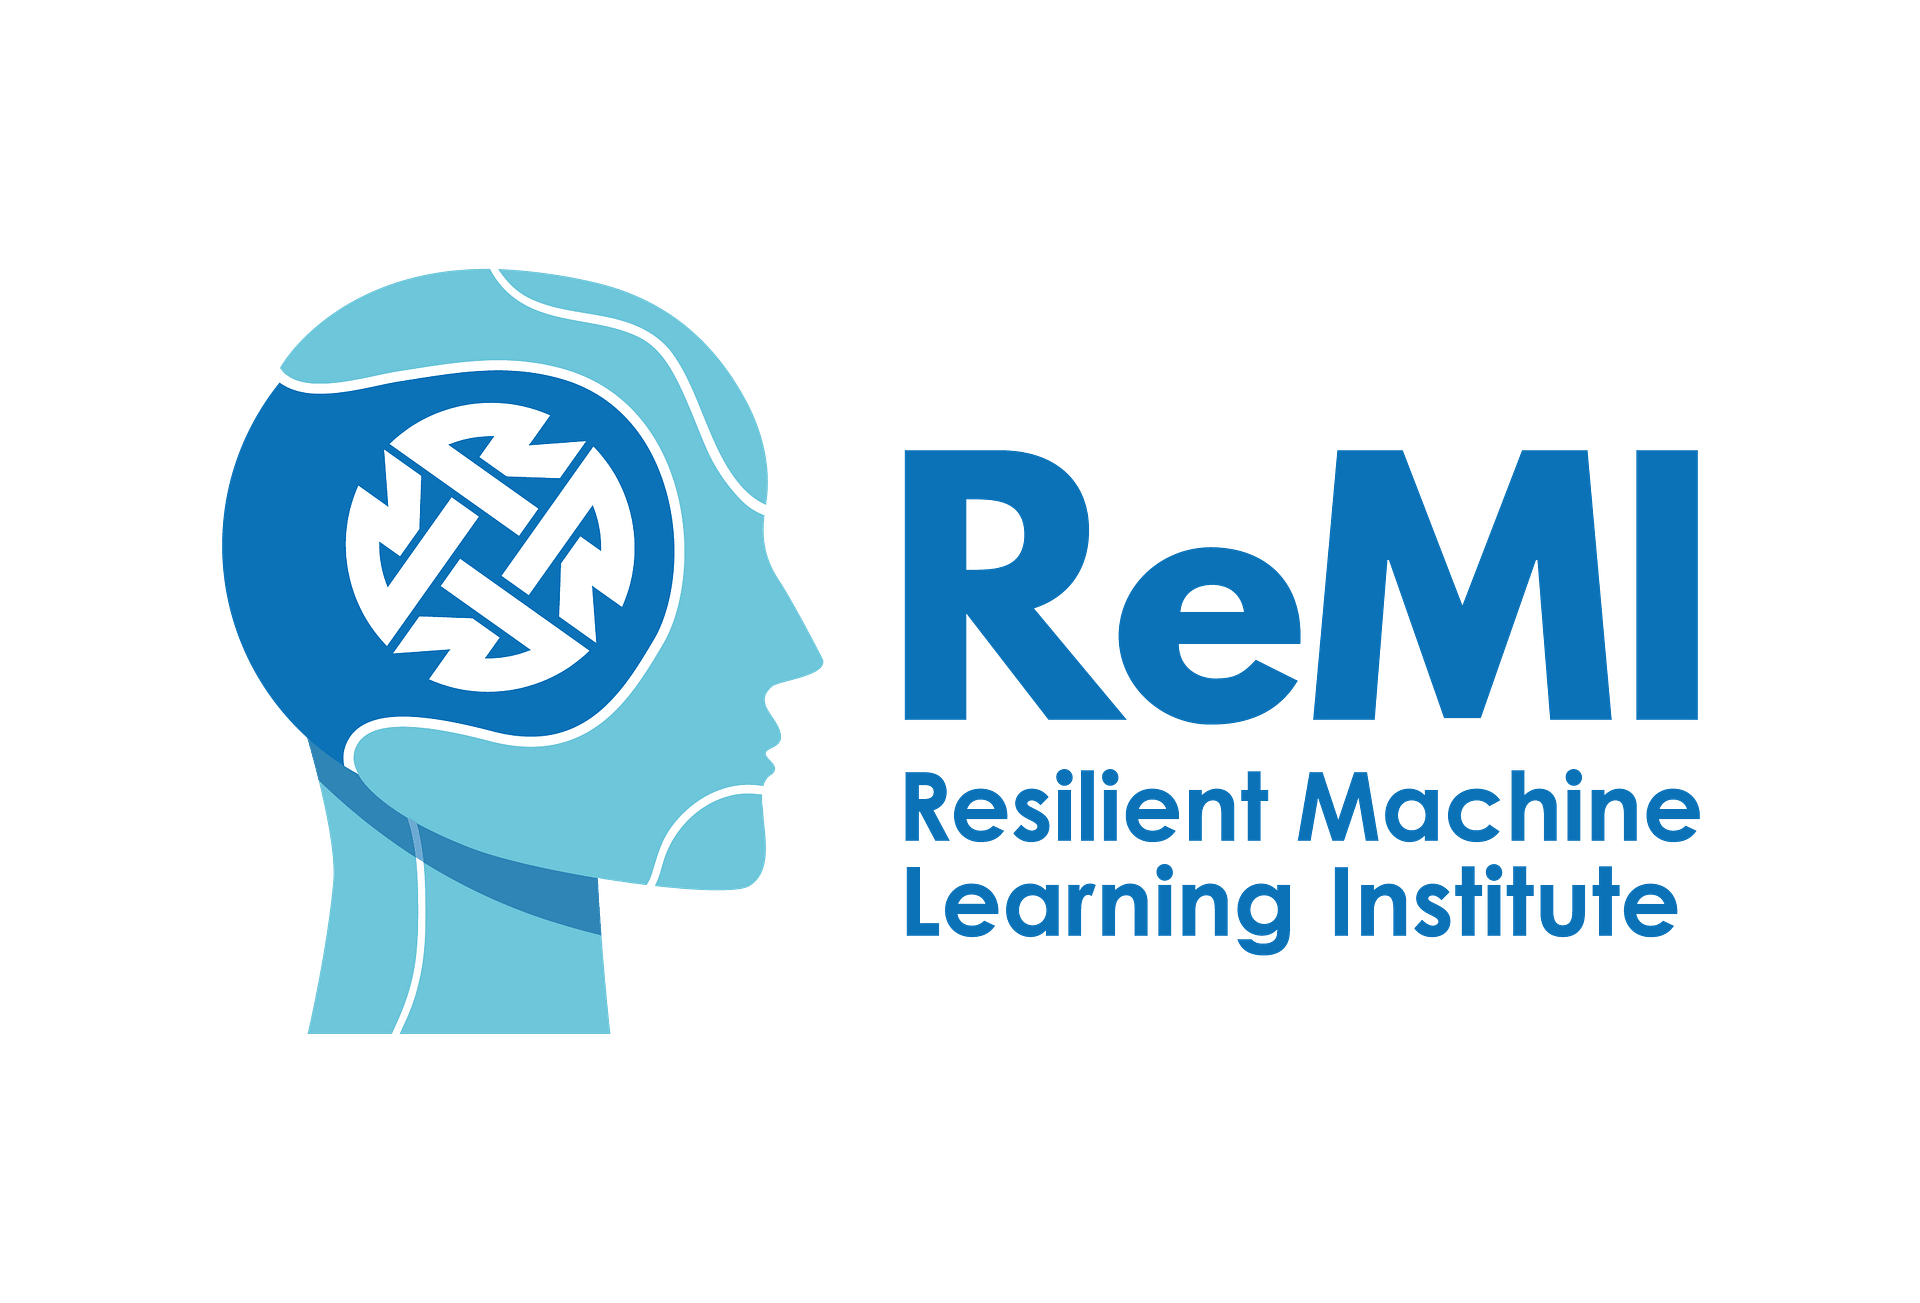 Resilient Machine Learning Institute